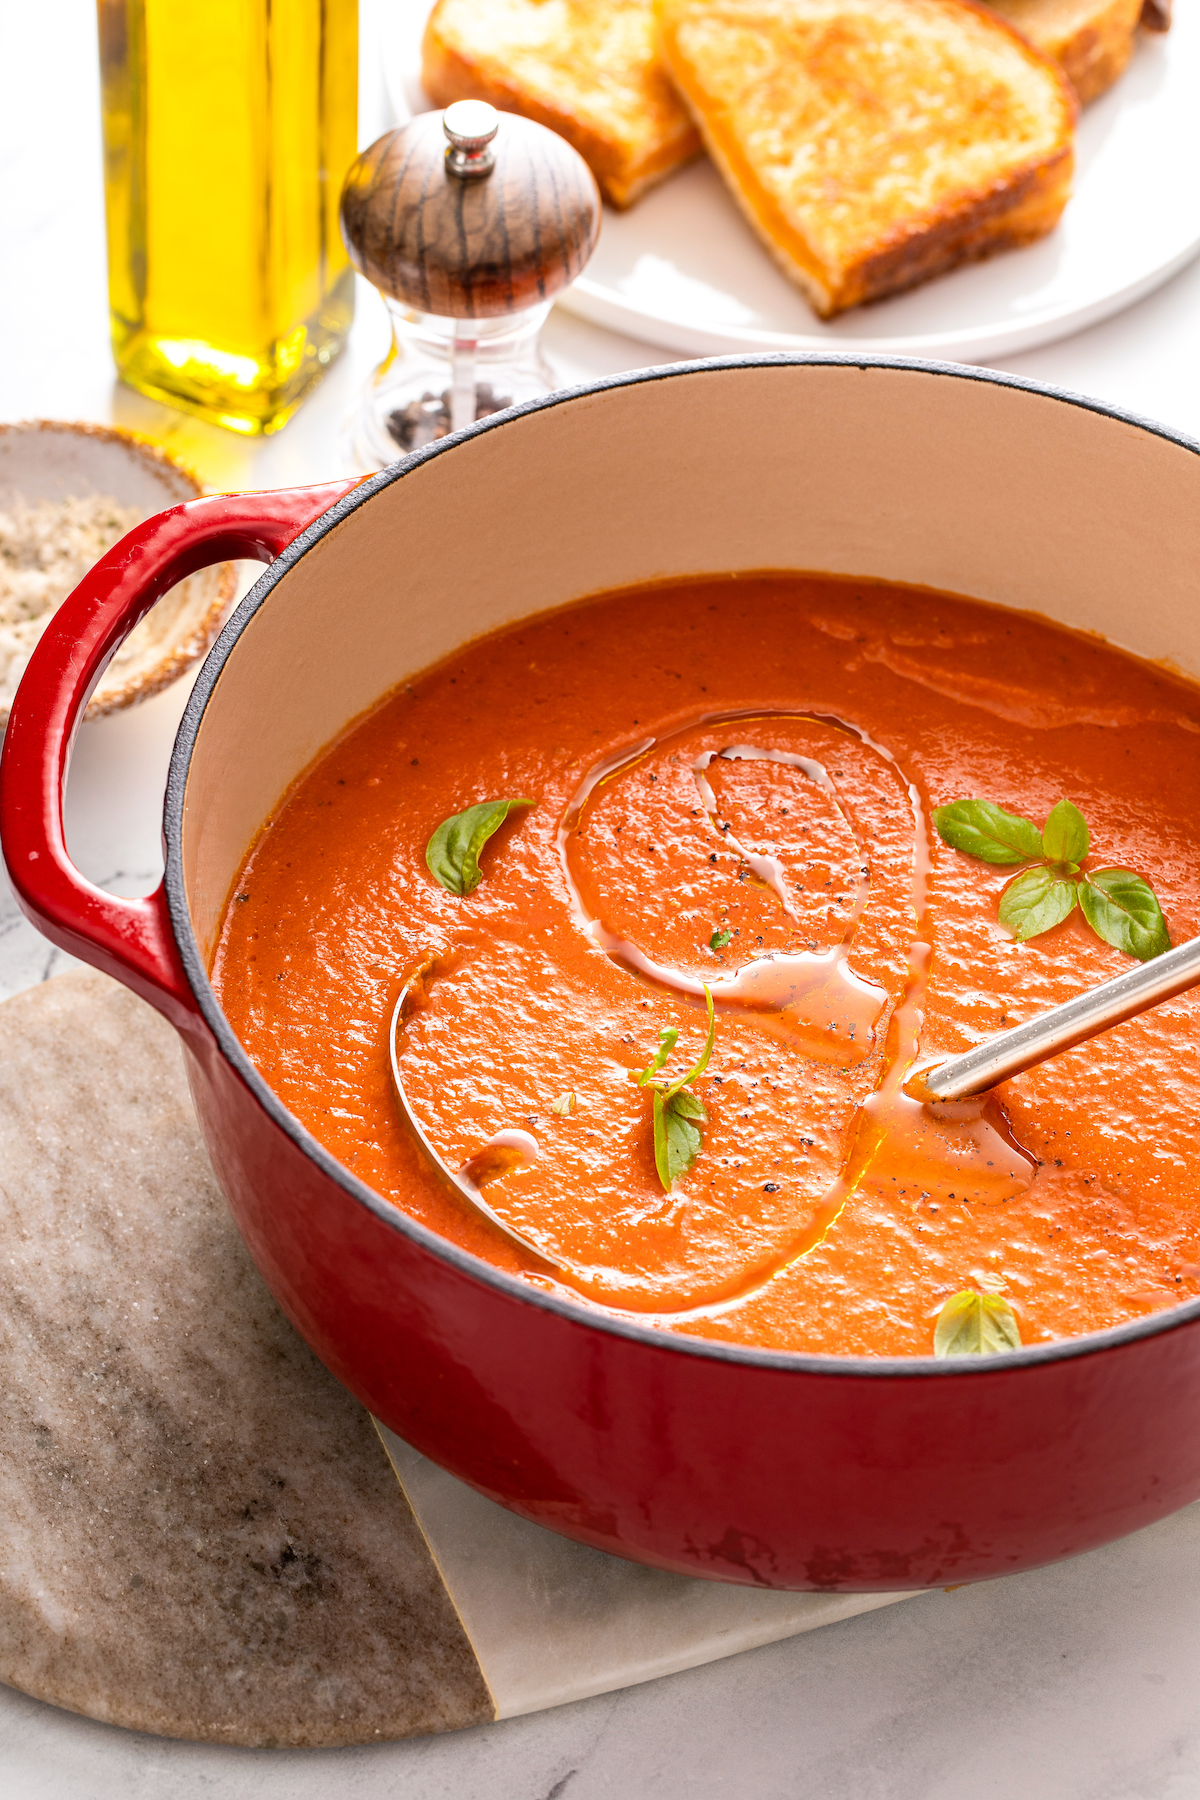 A red Dutch oven with tomato soup and a ladle.